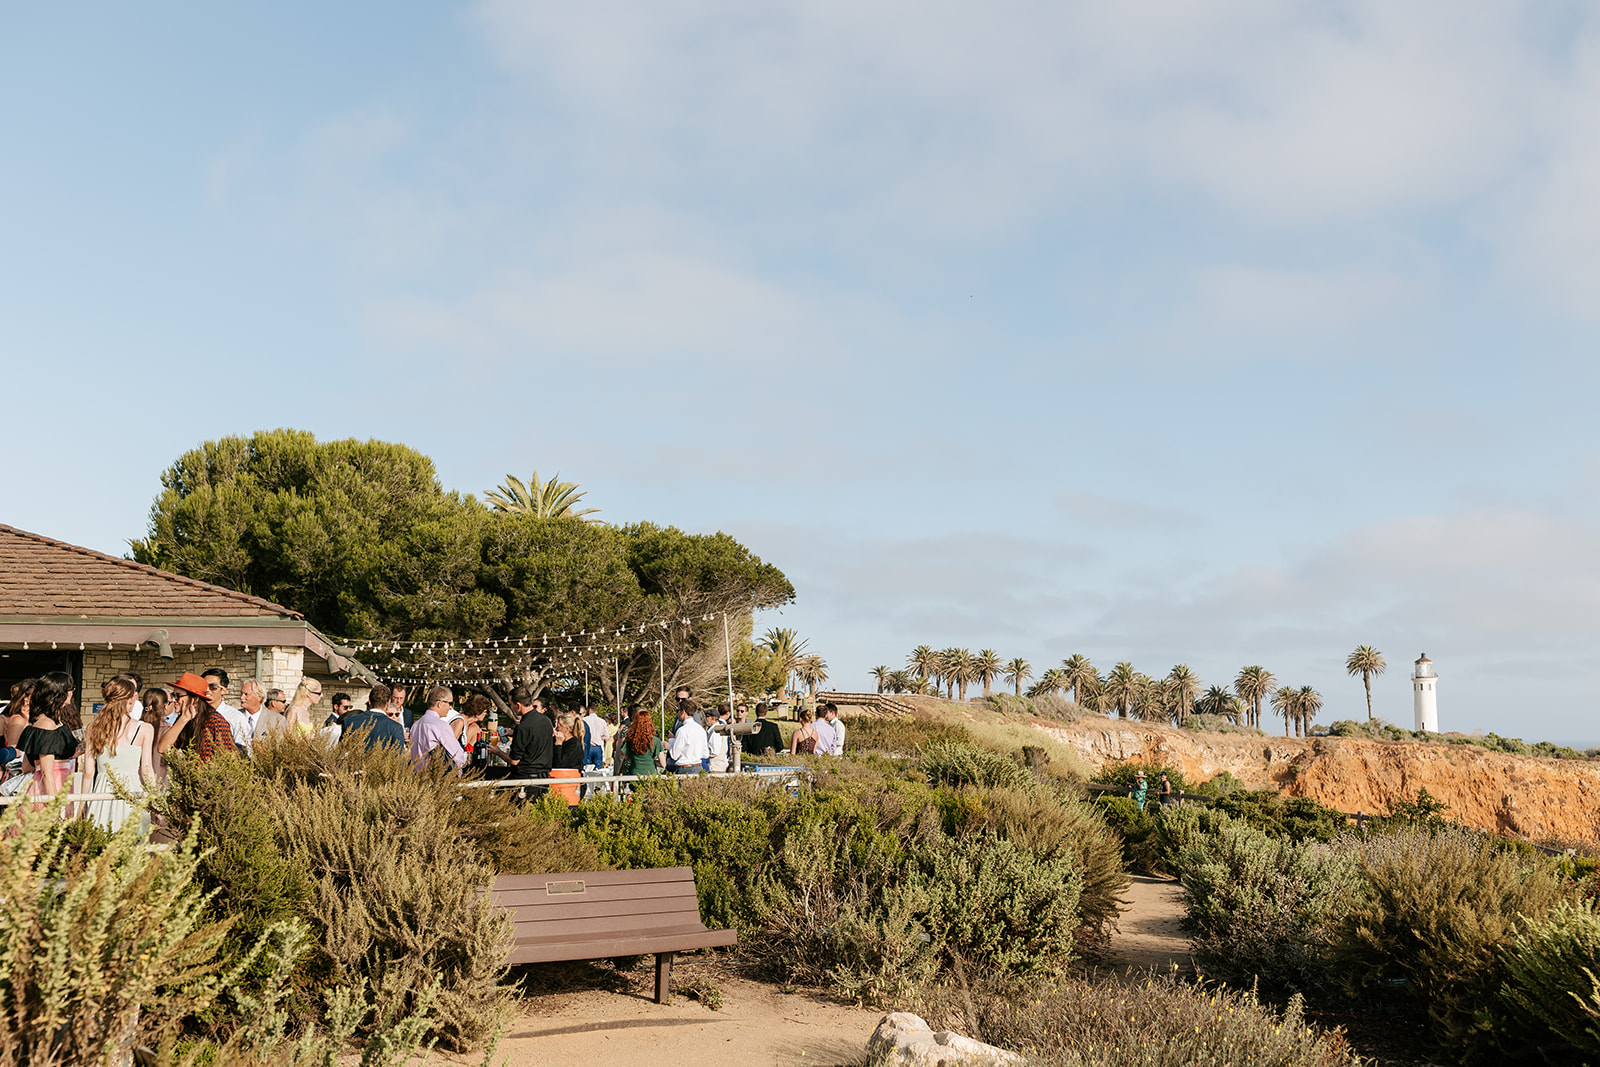 point vicente lighthouse wedding rancho palos verdes california outdoor reception wedding party bride and groom table